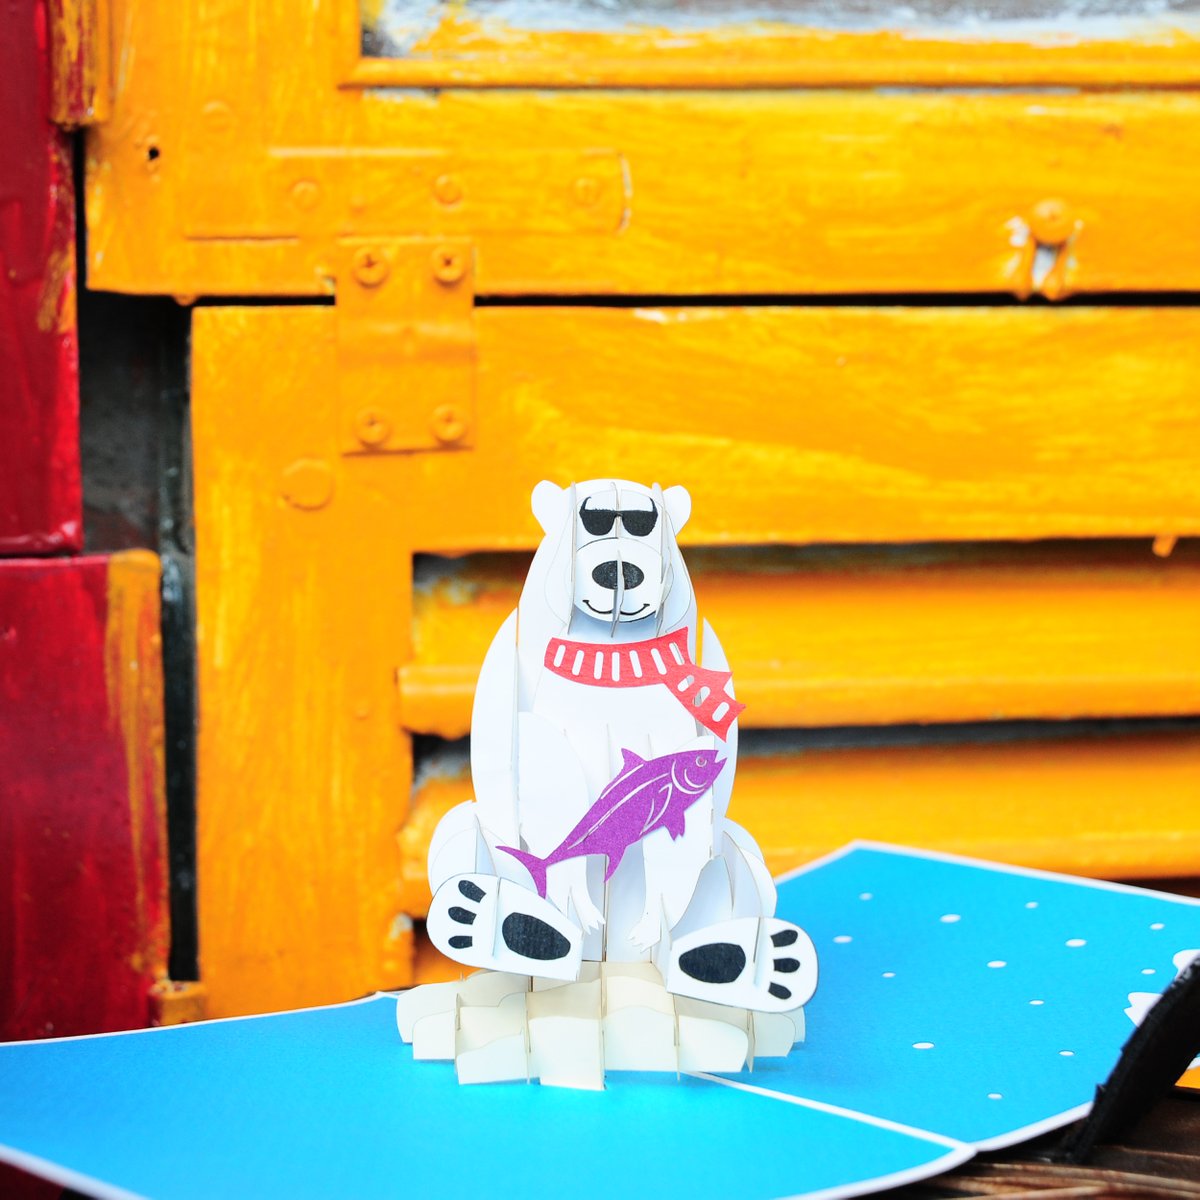 𝐏𝐨𝐥𝐚𝐫 𝐁𝐞𝐚𝐫 𝐏𝐨𝐩 𝐔𝐩 𝐂𝐚𝐫𝐝

#charmpopcards #popupcard #3dcard #greetingcard #handmadecard #animallover #polarbear #cute #adorable #coolpolarbear #encouragementcard #blankcard #justbecausegift #etsy #shopsmall #instagramfinds